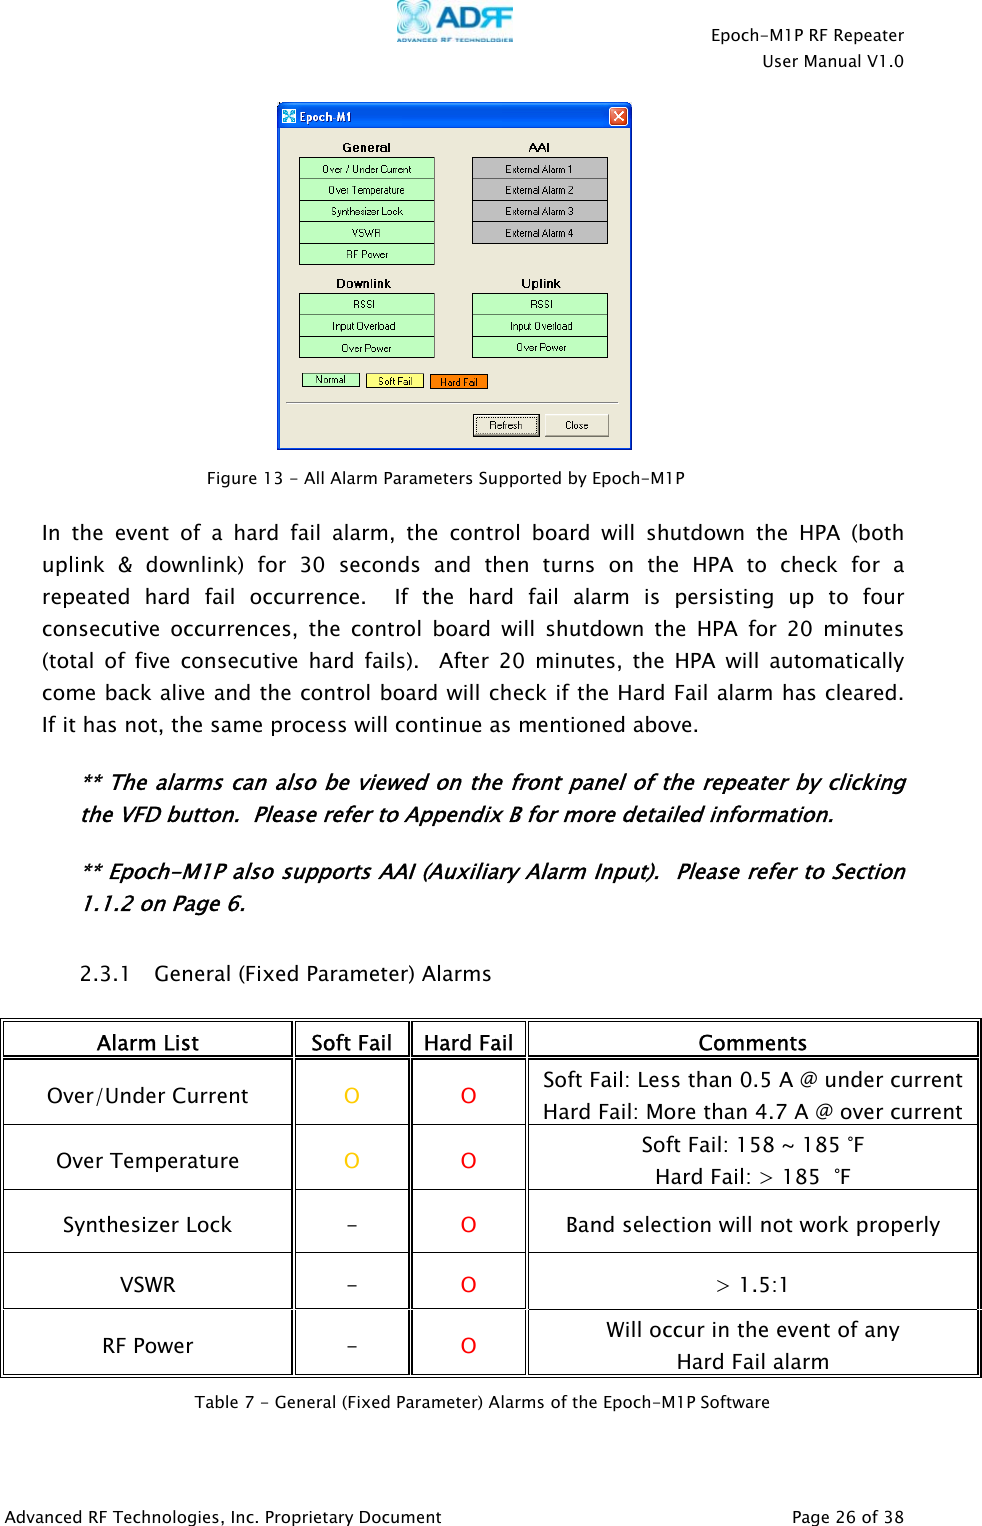    Epoch-M1P RF Repeater  User Manual V1.0    Figure 13 - All Alarm Parameters Supported by Epoch-M1P  In the event of a hard fail alarm, the control board will shutdown the HPA (both uplink &amp; downlink) for 30 seconds and then turns on the HPA to check for a repeated hard fail occurrence.  If the hard fail alarm is persisting up to four consecutive occurrences, the control board will shutdown the HPA for 20 minutes (total of five consecutive hard fails).  After 20 minutes, the HPA will automatically come back alive and the control board will check if the Hard Fail alarm has cleared.  If it has not, the same process will continue as mentioned above. ** The alarms can also be viewed on the front panel of the repeater by clickingthe VFD button.  Please refer to Appendix B for more detailed information.  rt r r t) f r t  2.3.1 ** Epoch-M1P also suppo s AAI (Auxilia y Ala m Inpu .  Please re e  to Sec ion1.1.2 on Page 6.  General (Fixed Parameter) Alarms  Alarm List  Soft Fail  Hard Fail Comments Over/Under Current  O  O  Soft Fail: Less than 0.5 A @ under current Hard Fail: More than 4.7 A @ over current Over Temperature  O  O  Soft Fail: 158 ~ 185 °F  Hard Fail: &gt; 185  °F  Synthesizer Lock  -  O  Band selection will not work properly  VSWR  -  O  &gt; 1.5:1  RF Power  -  O  Will occur in the event of any  Hard Fail alarm  Table 7 - General (Fixed Parameter) Alarms of the Epoch-M1P Software   Advanced RF Technologies, Inc. Proprietary Document   Page 26 of 38  